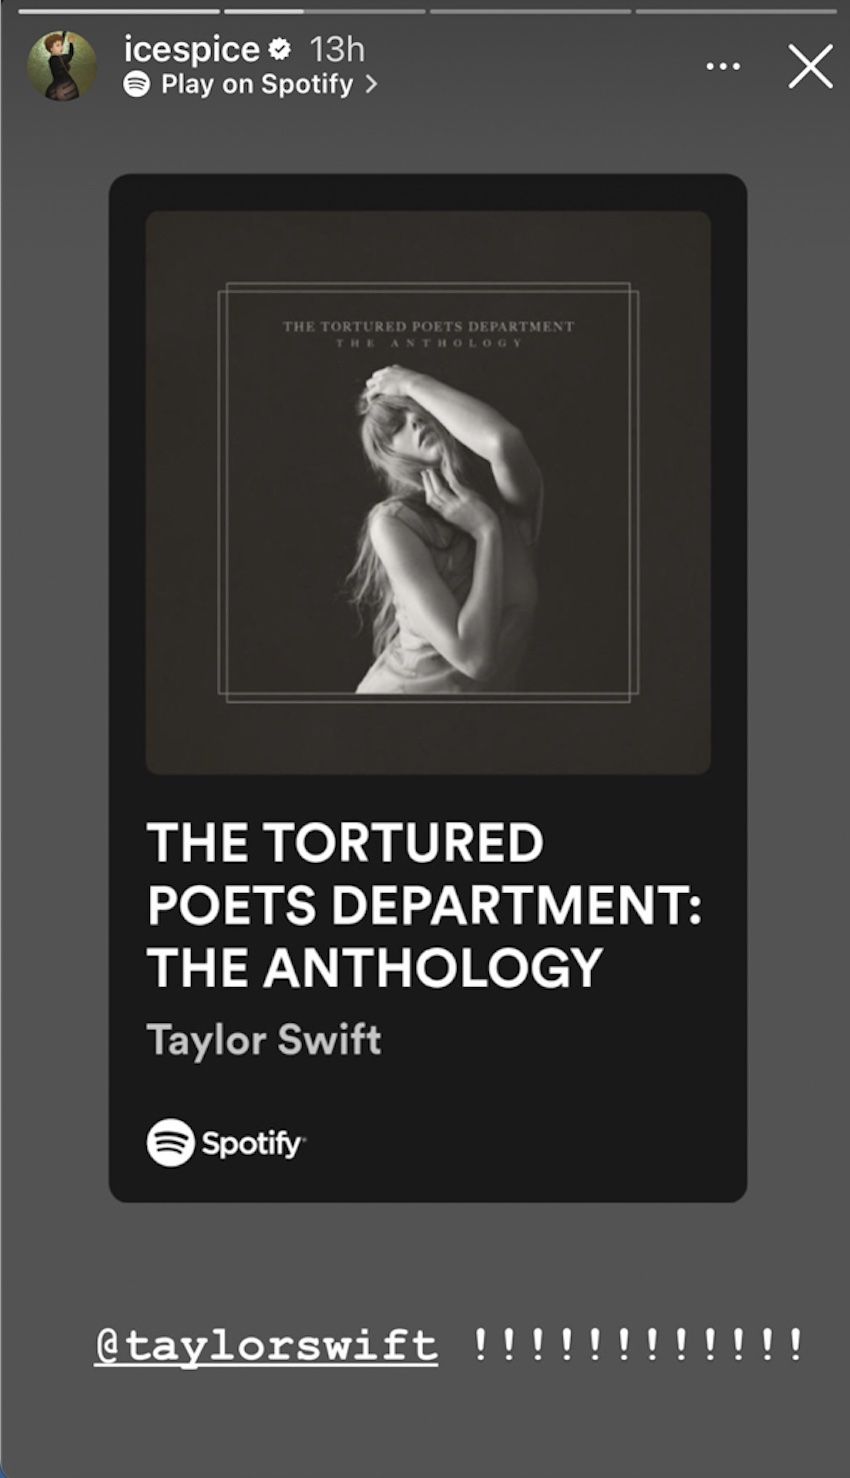 Ice Spice shares a story about Taylor Swift's new album, The Tortured Poets Department